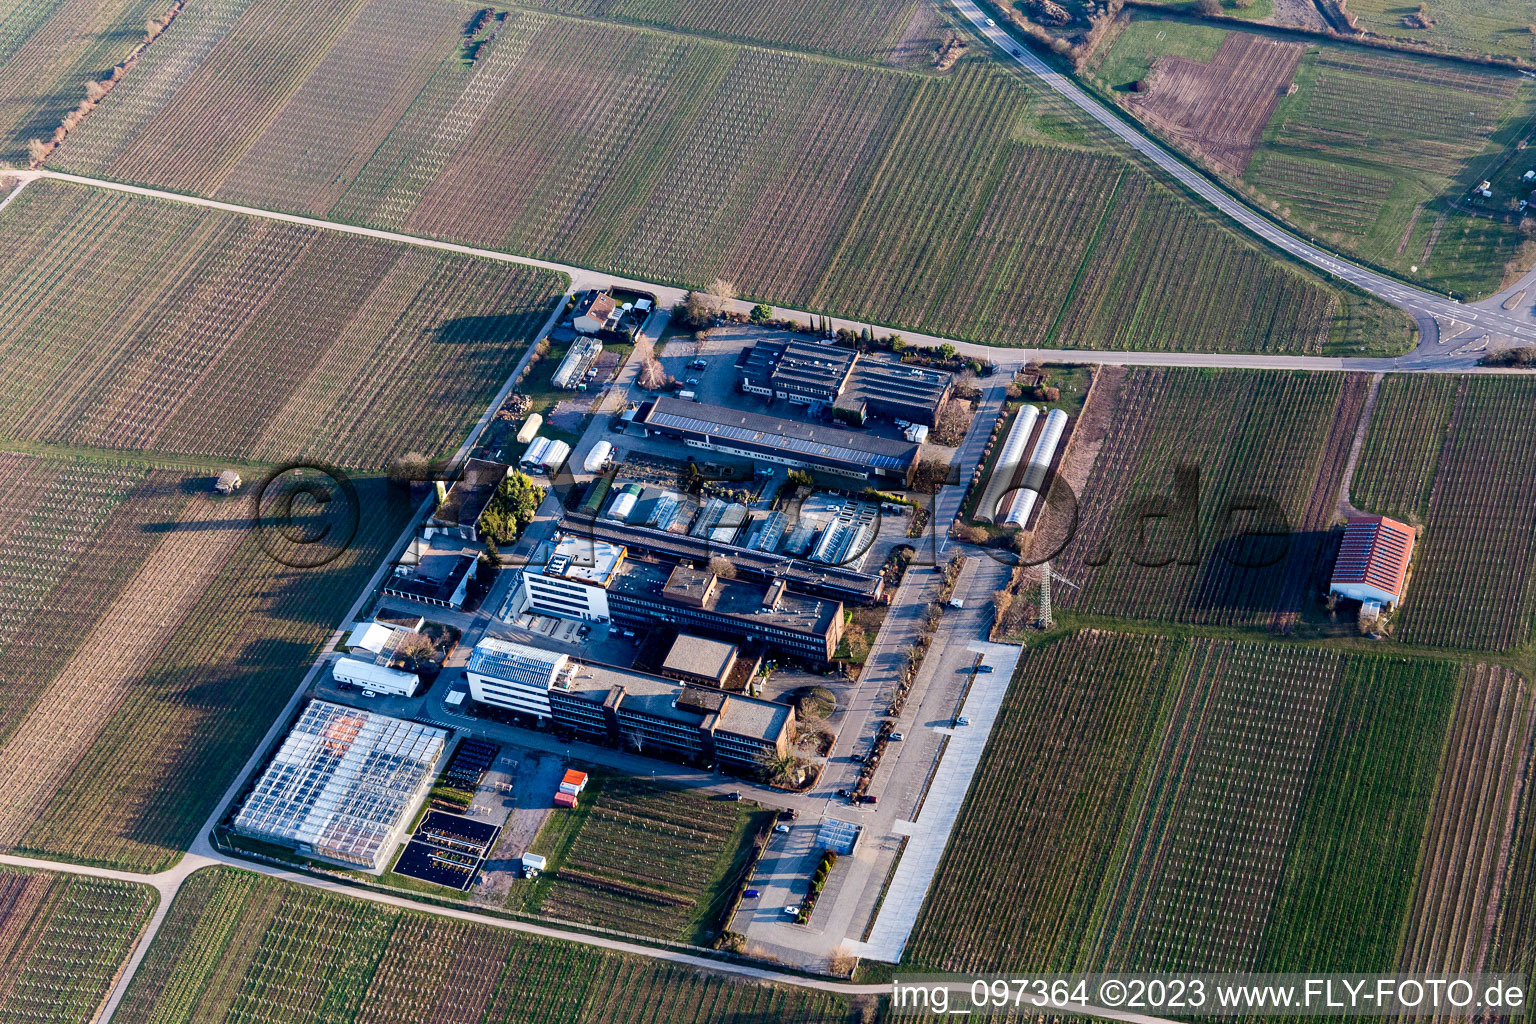 Aerial view of RLP Agroscience in the district Mußbach in Neustadt an der Weinstraße in the state Rhineland-Palatinate, Germany